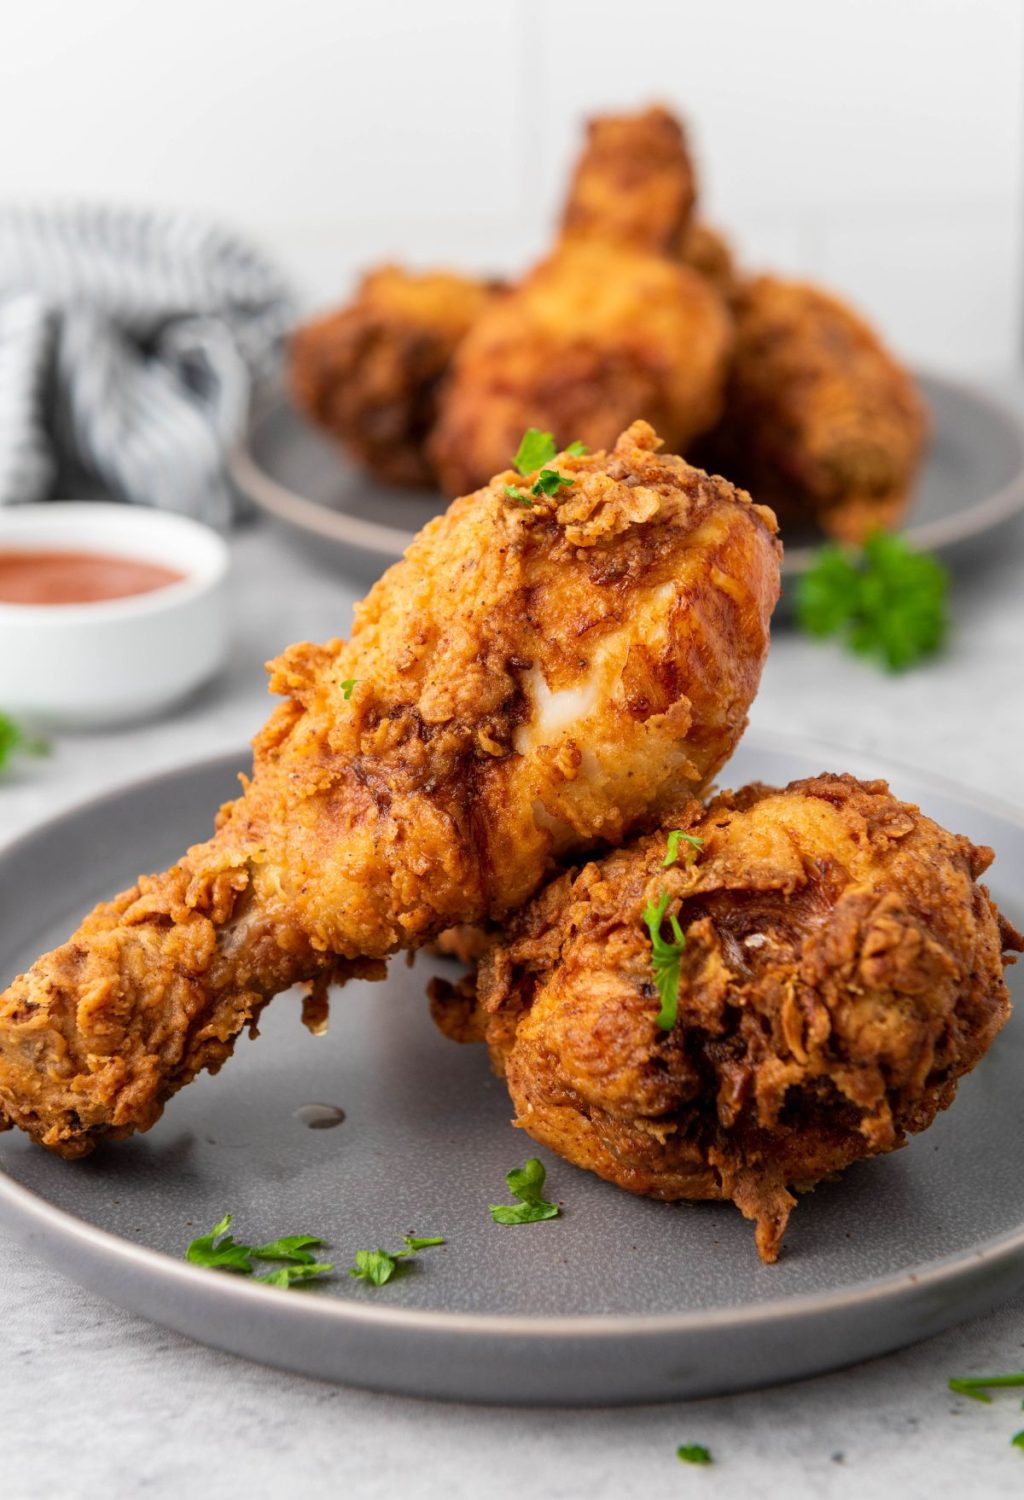 Fried chicken on a plate with sauce on the side.